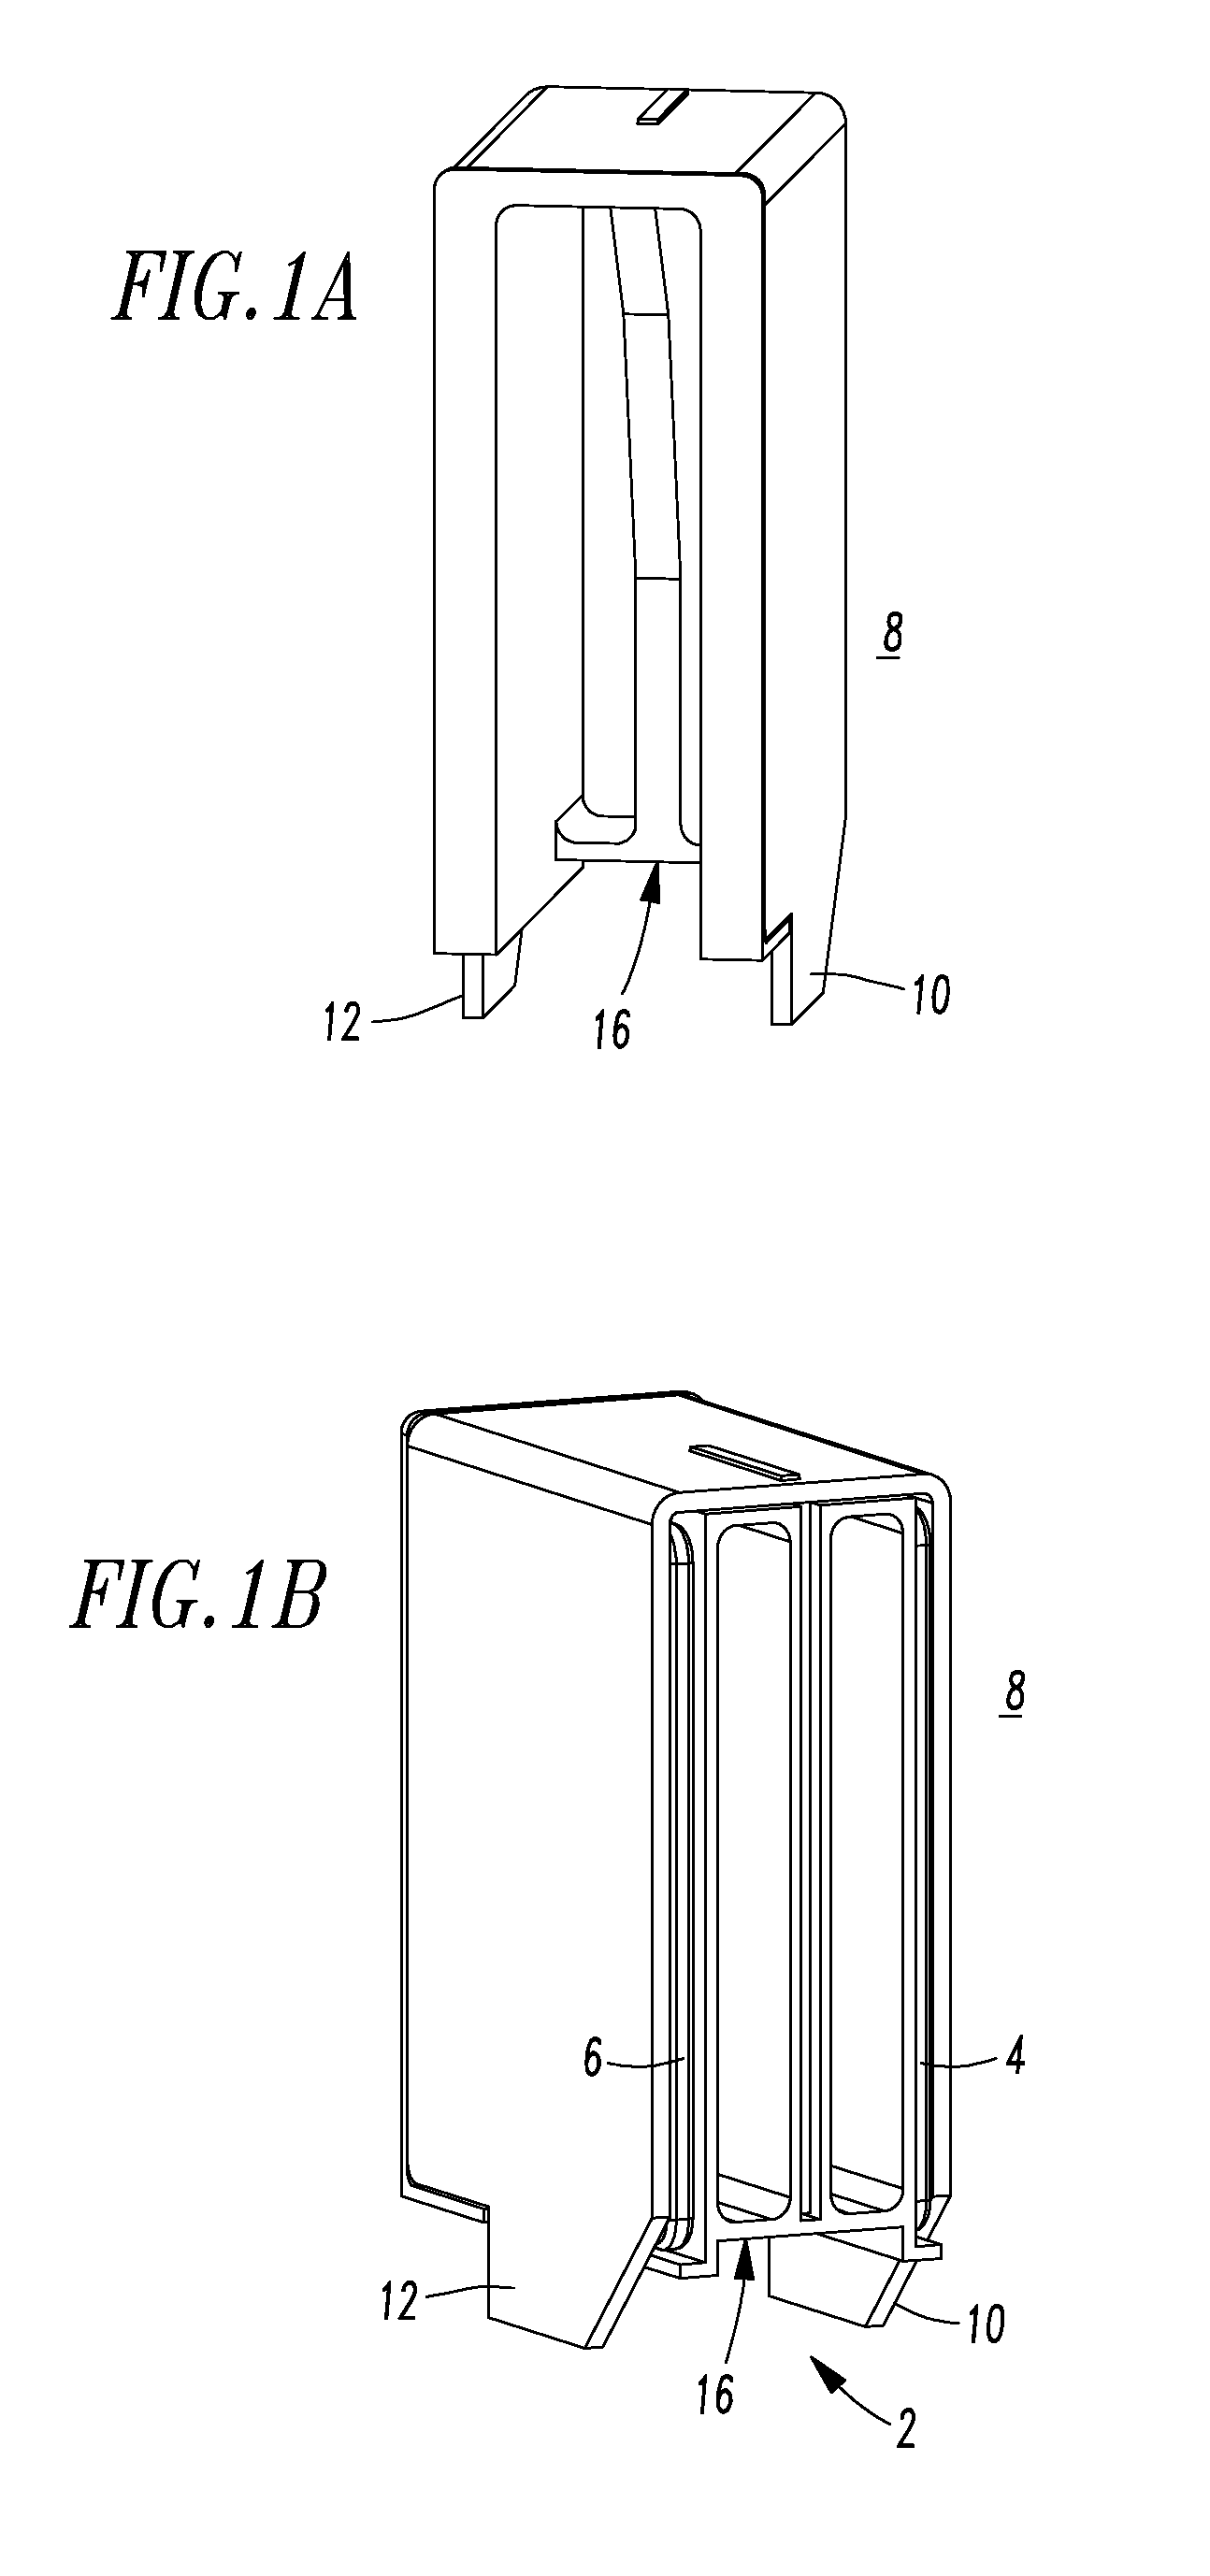 Single direct current arc chamber, and bi-directional direct current electrical switching apparatus employing the same